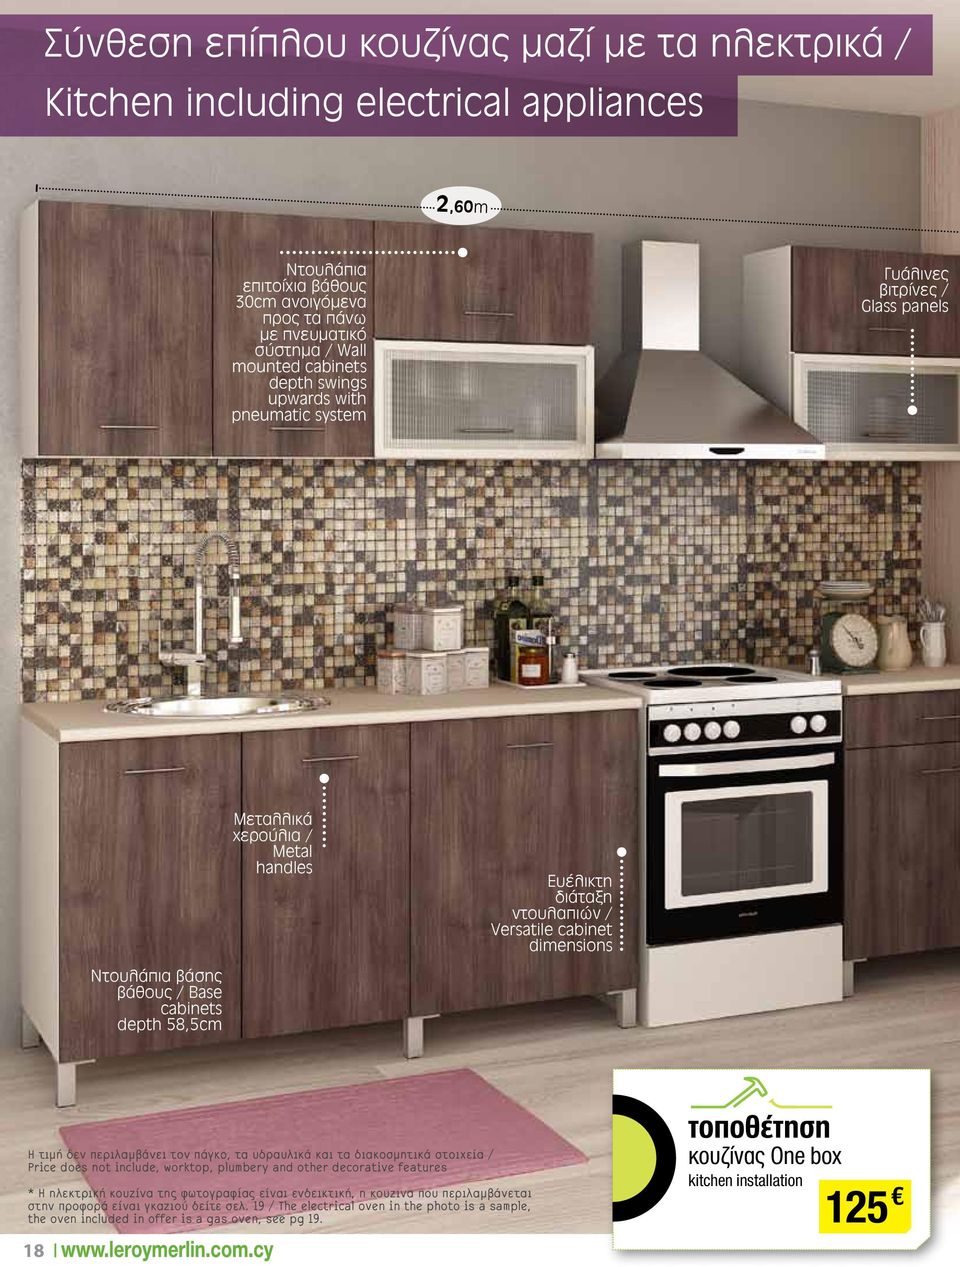 Versatile cabinet dimensions Η τιμή δεν περιλαμβάνει τον πάγκο, τα υδραυλικά και τα διακοσμητικά στοιχεία / Price does not include, worktop, plumbery and other decorative features * H ηλεκτρική